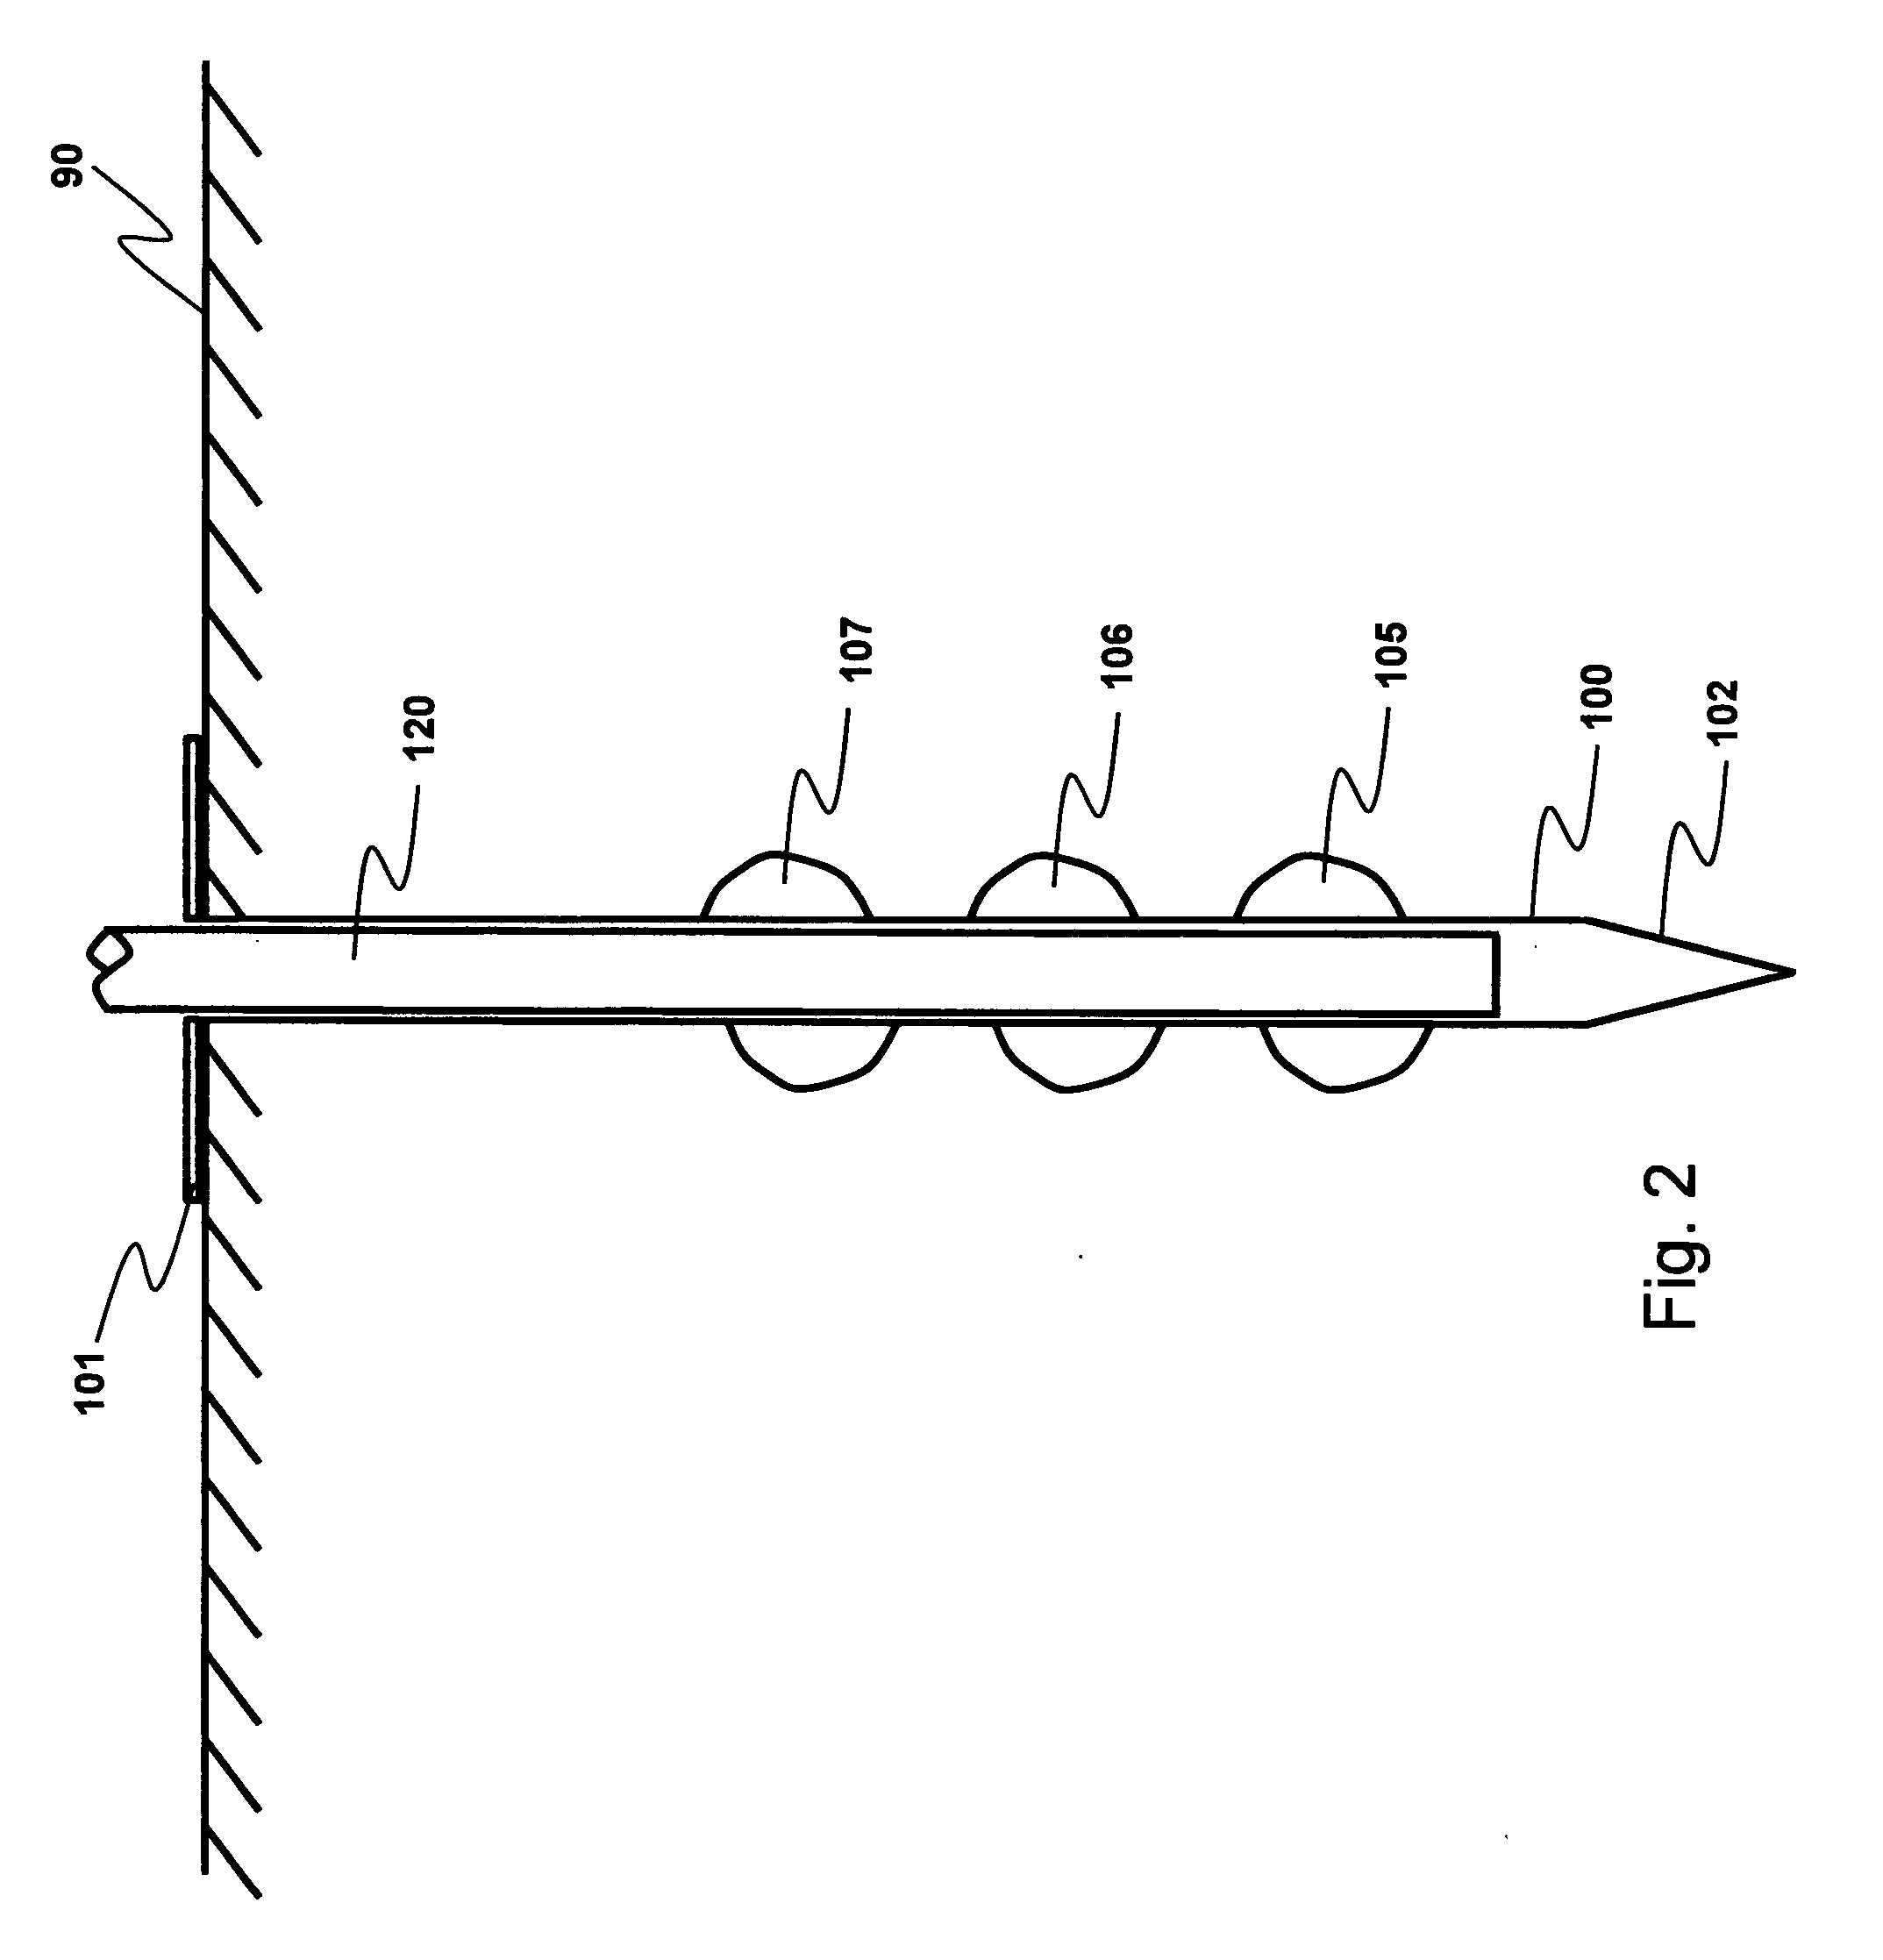 Solar photovoltaic support and tracking system with vertical adjustment capability